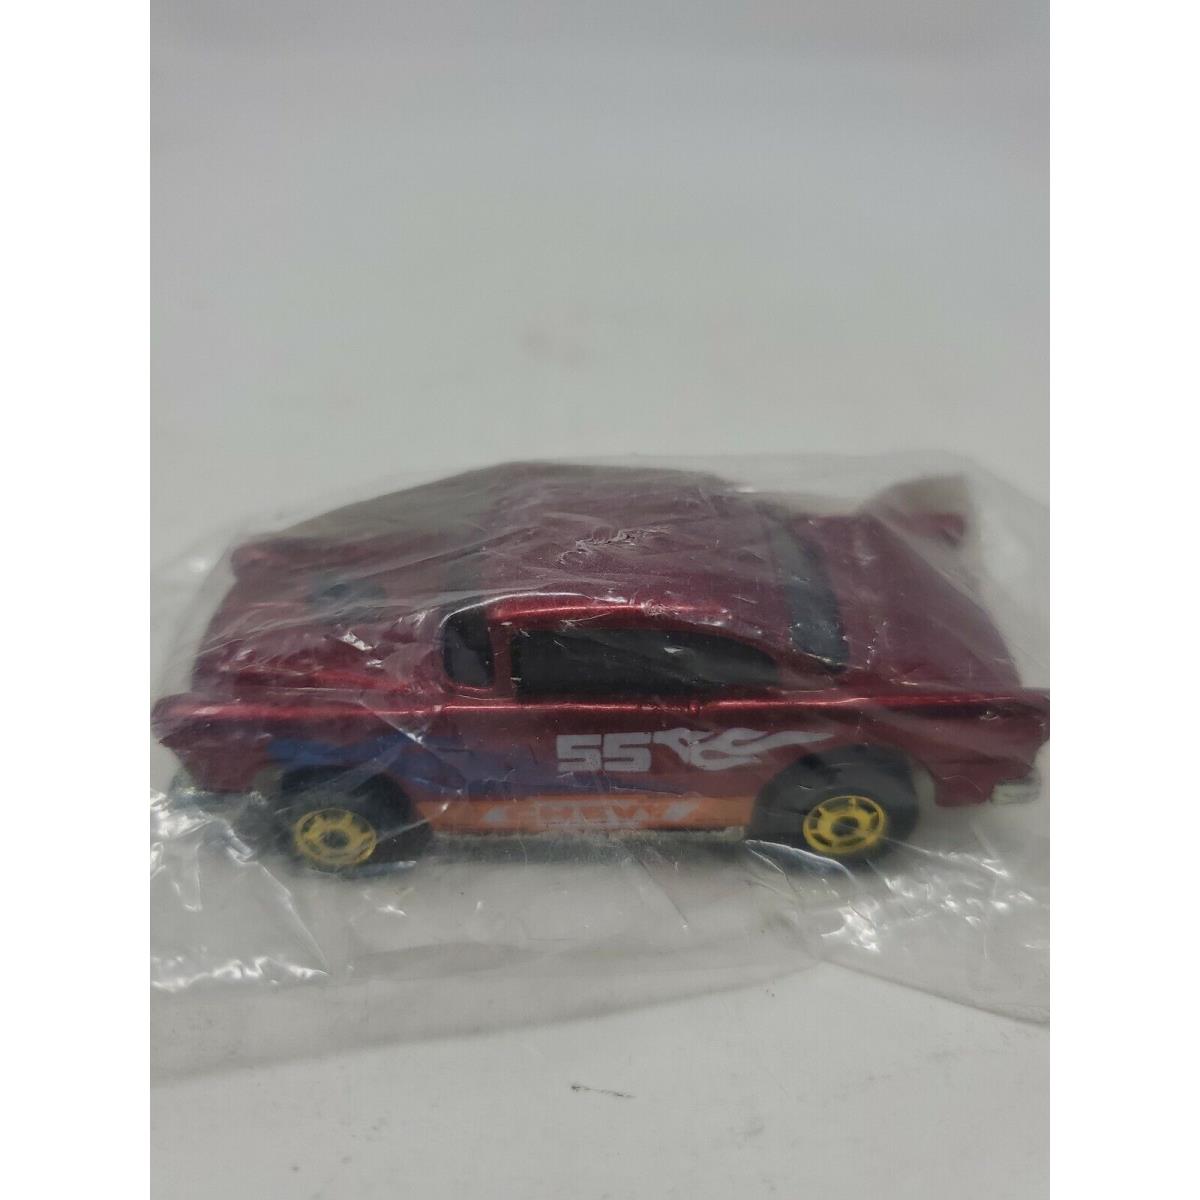 Hot Wheels 1978 55` Chevy - Dark Red with Graphics- Malaysia Base in Baggie